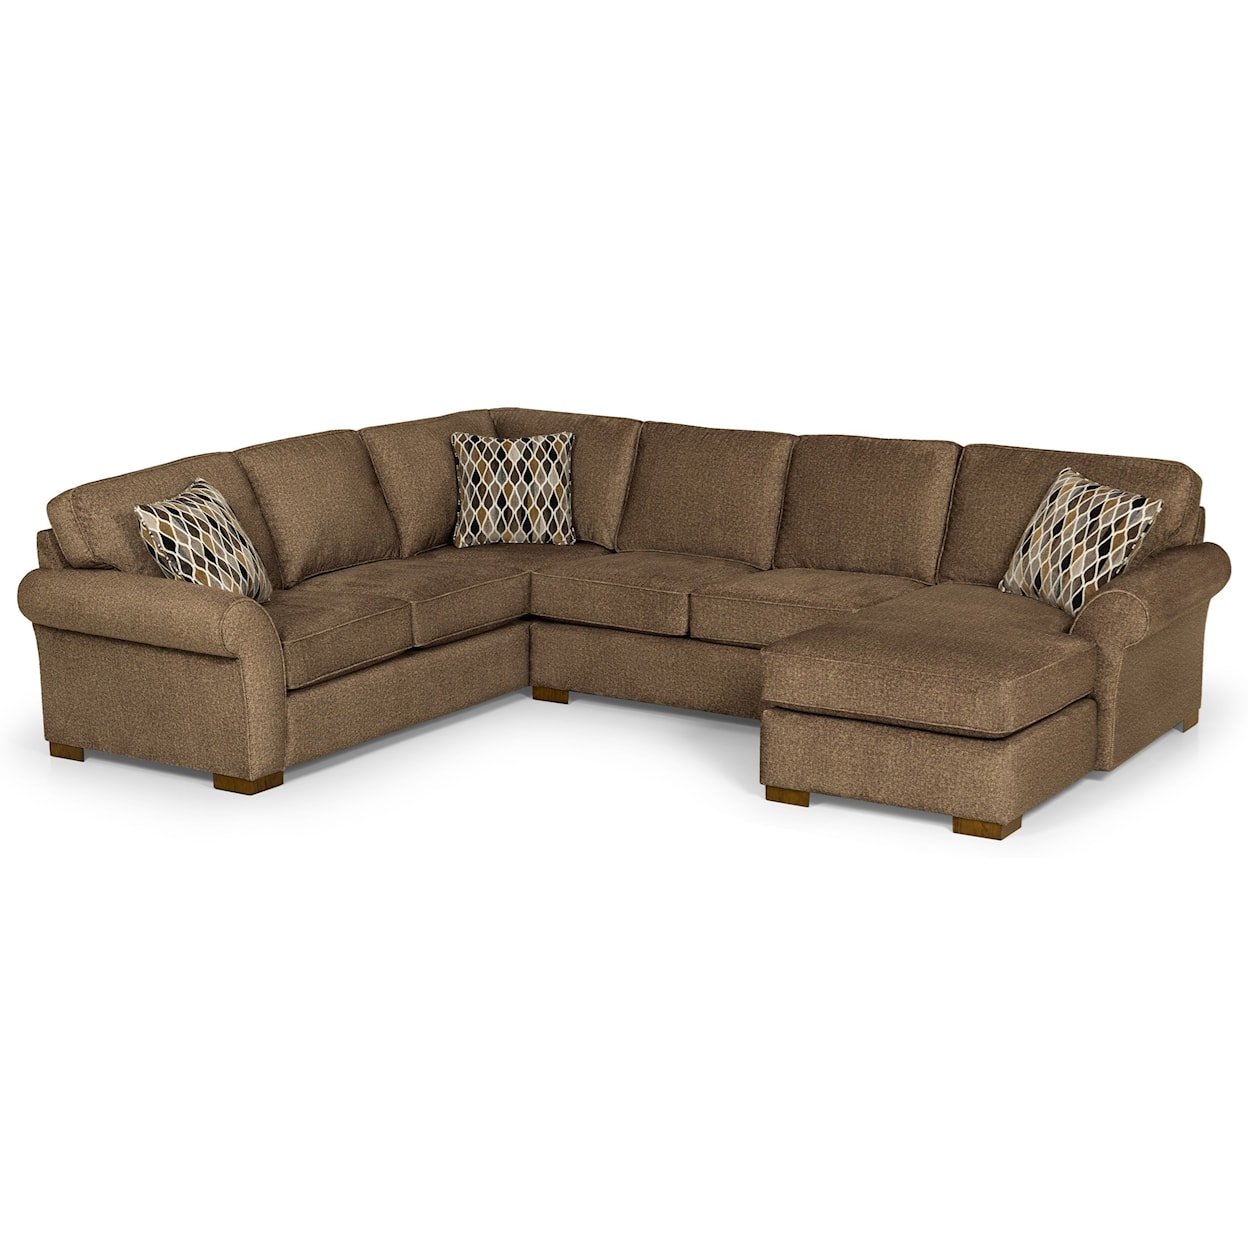 Sunset Home 29662 5-Seat Sectional Sofa w/ RAF Chaise & Storag